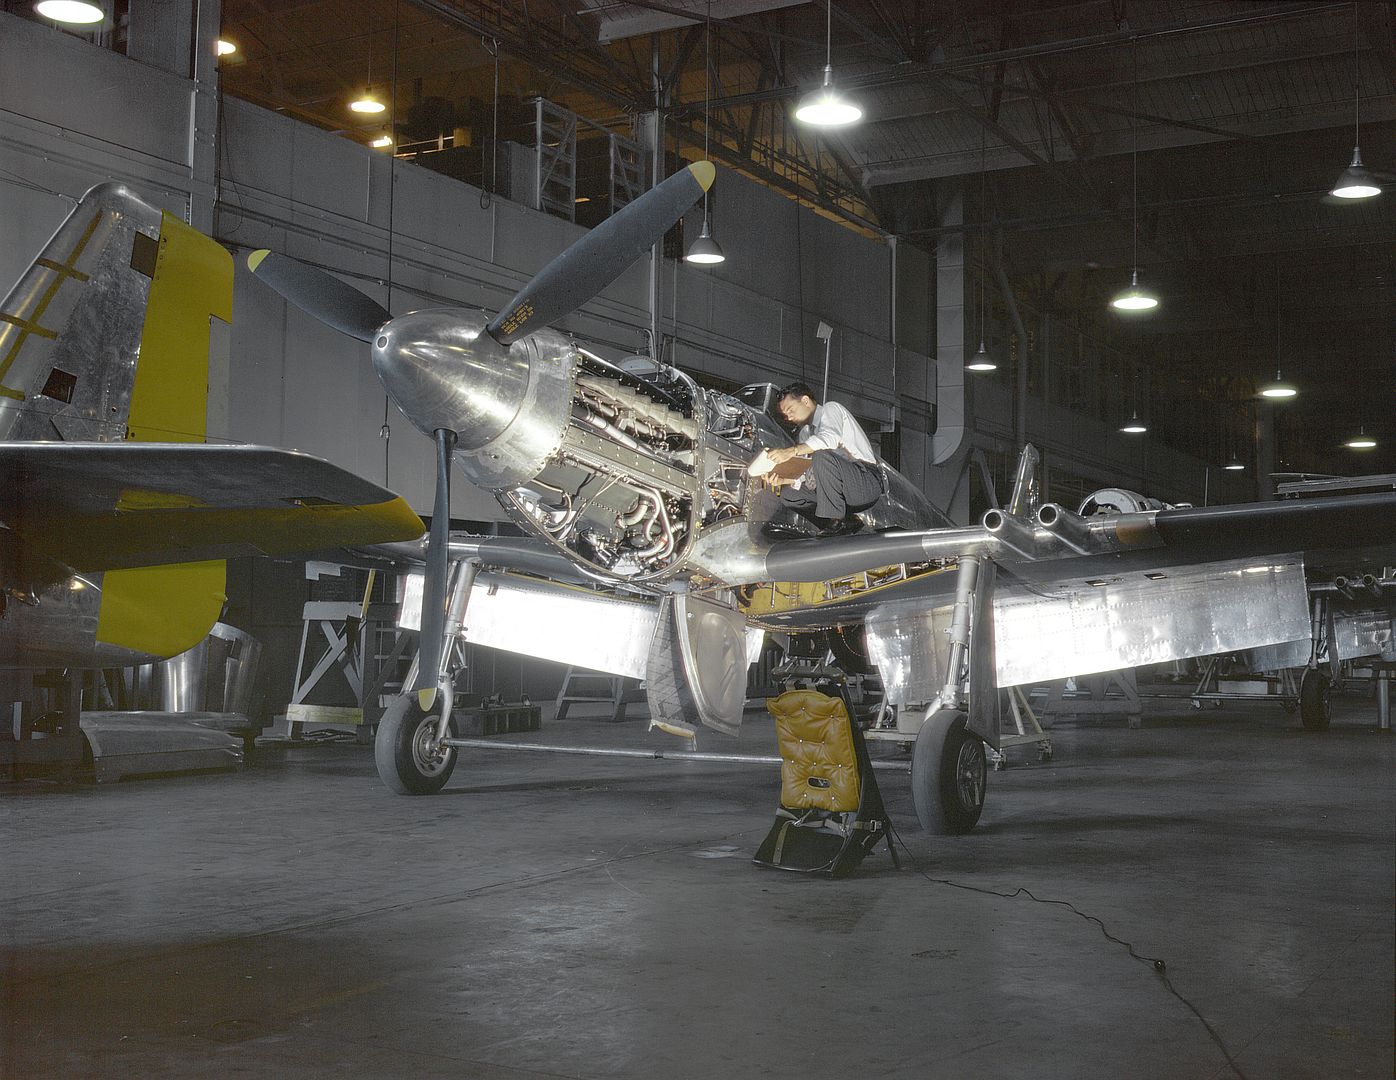 An Inspector OfNorth American Aviation In Inglewood California Looks Over A Mustang Mk I Fighter Destined For The British Royal Air Force In Fall 1942